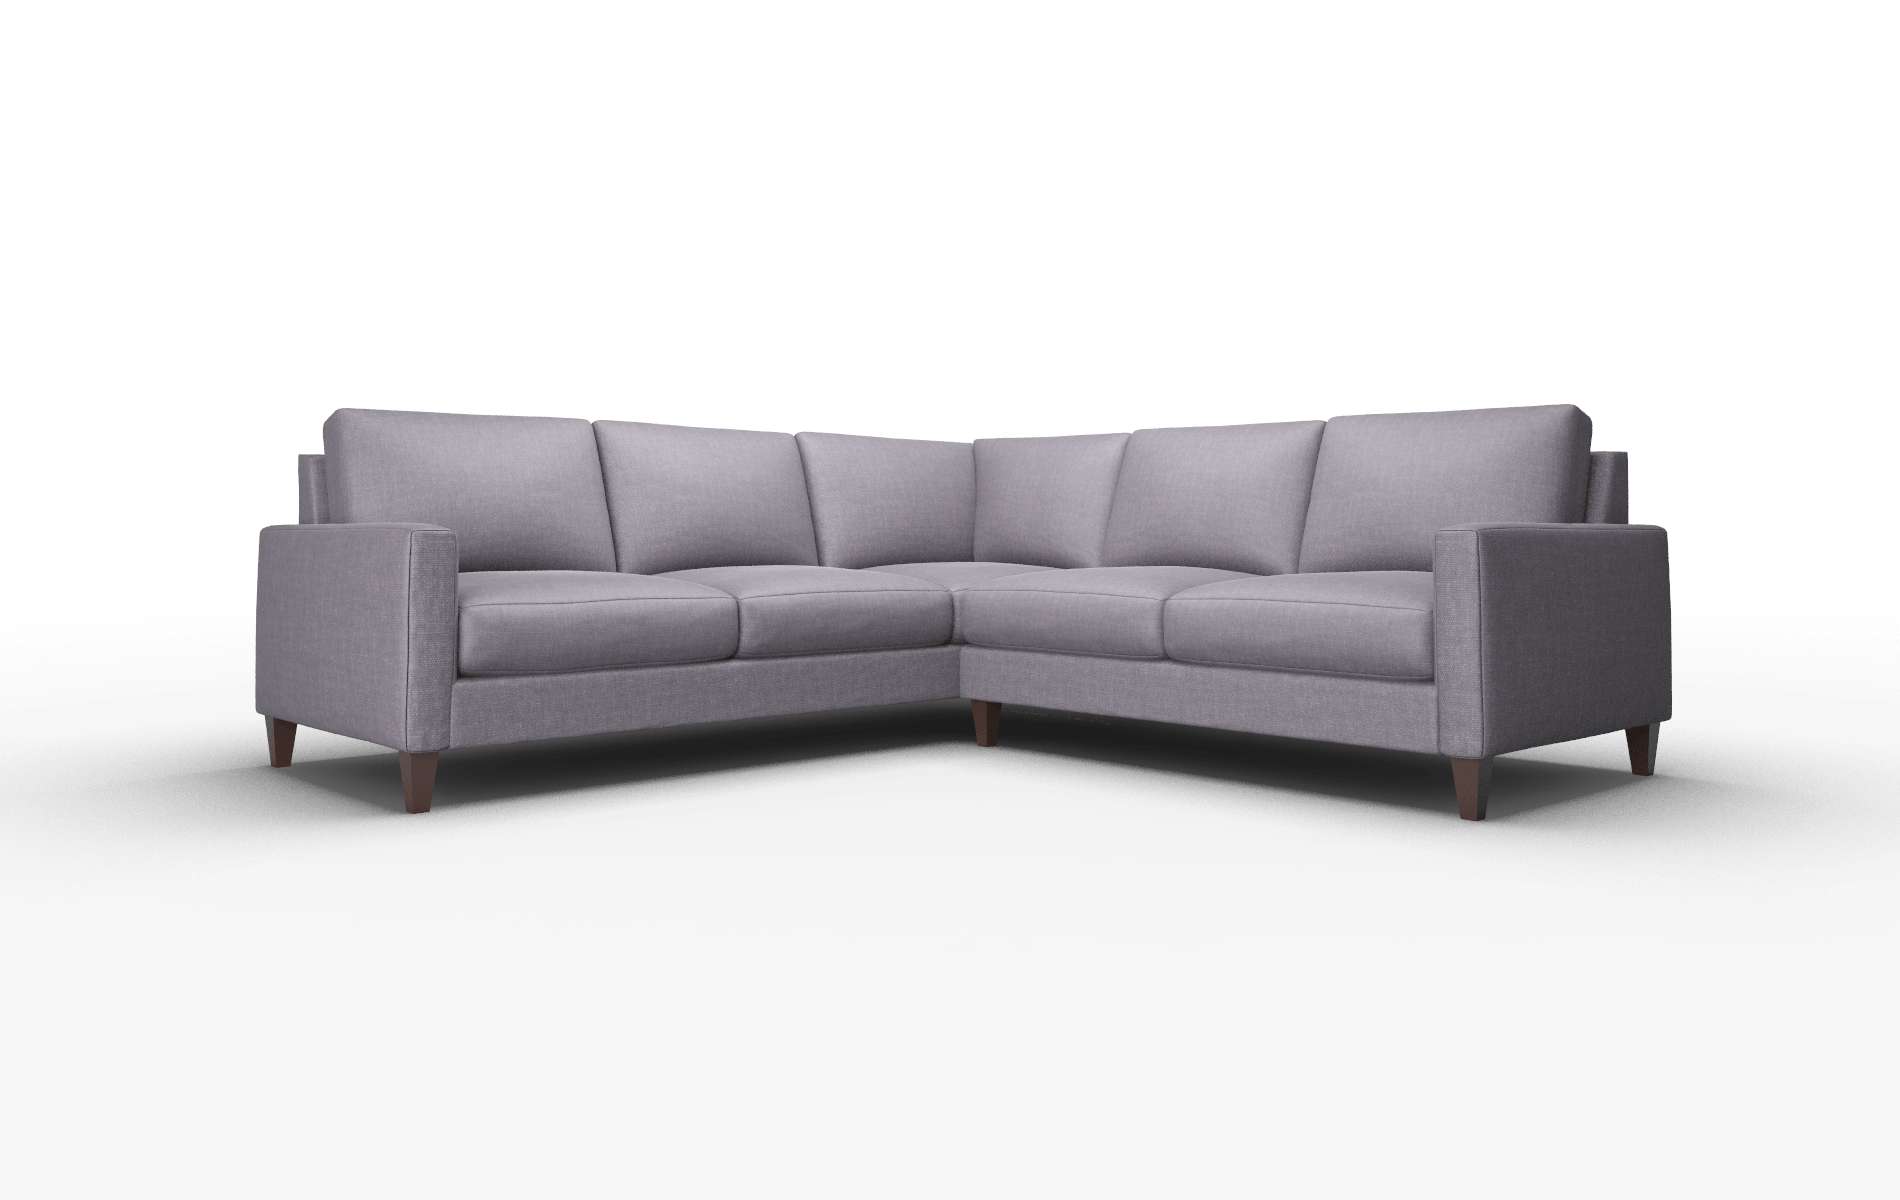 Cannes Durham Ink Sectional espresso legs